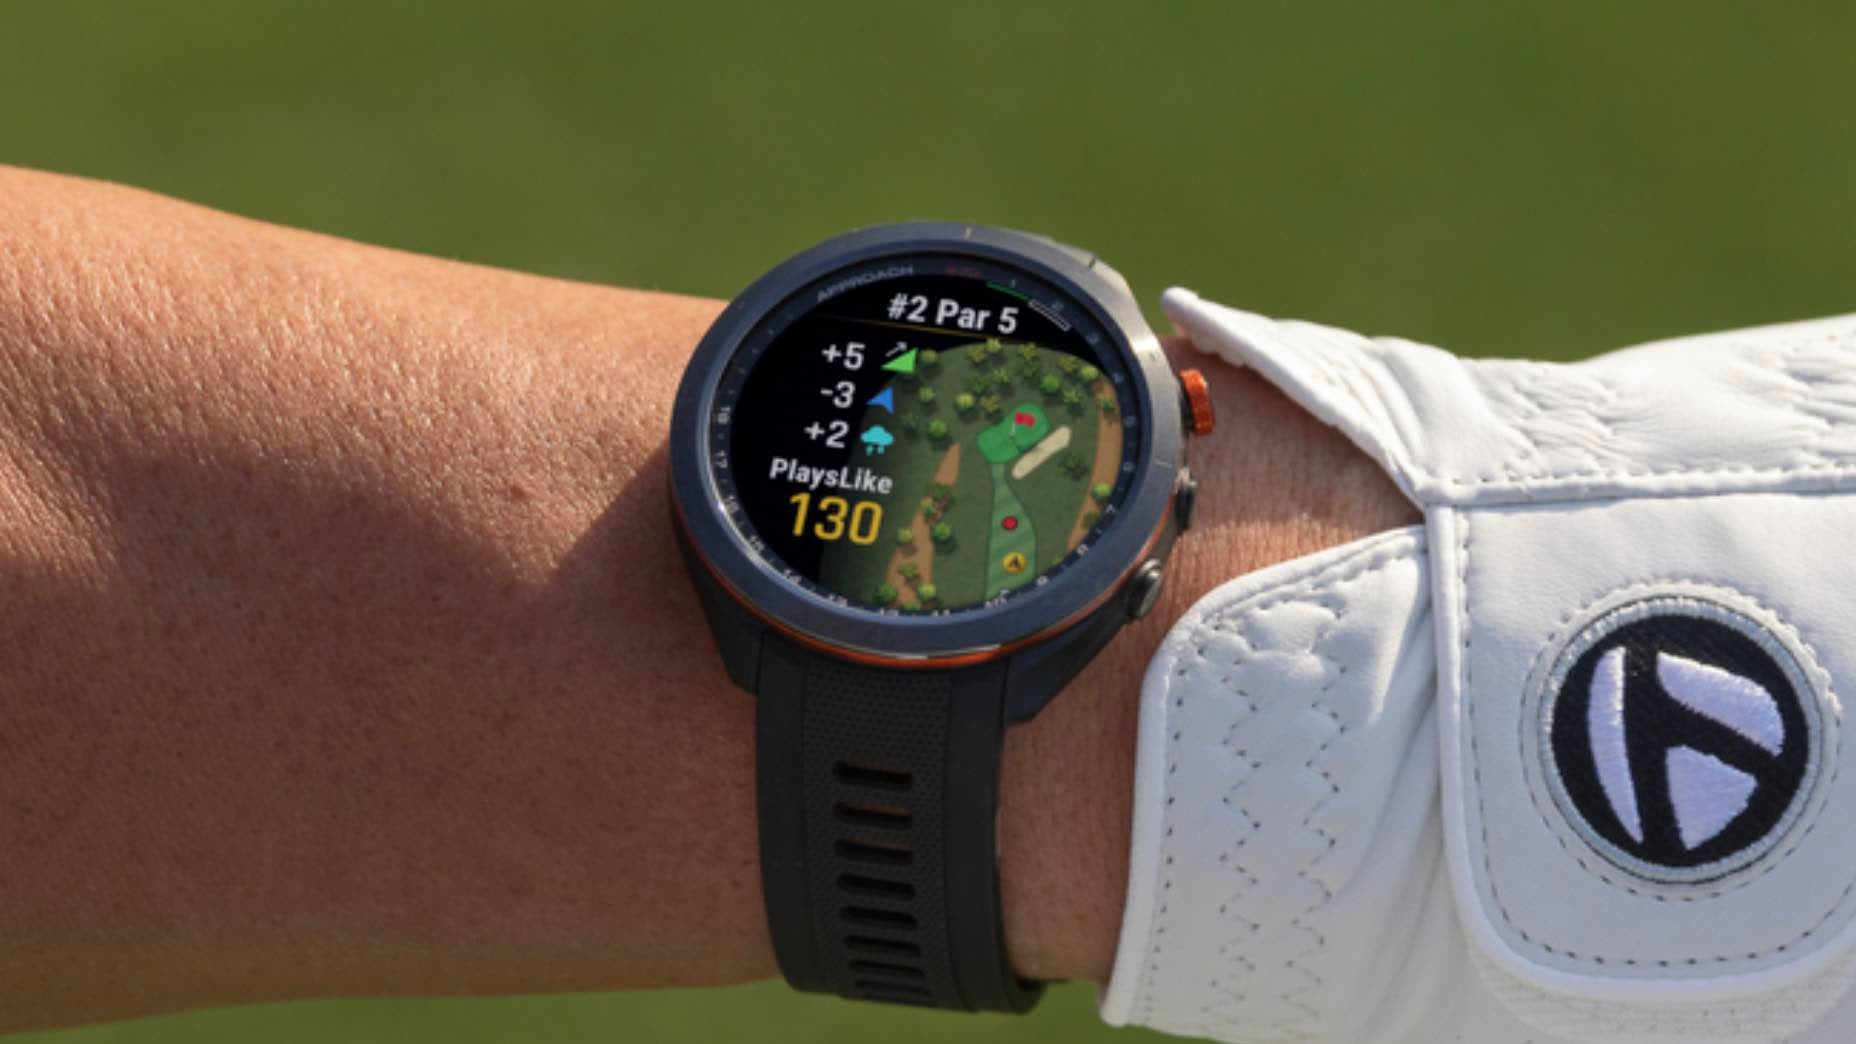 Garmin's newest smartwatch comes loaded with golf-savvy features